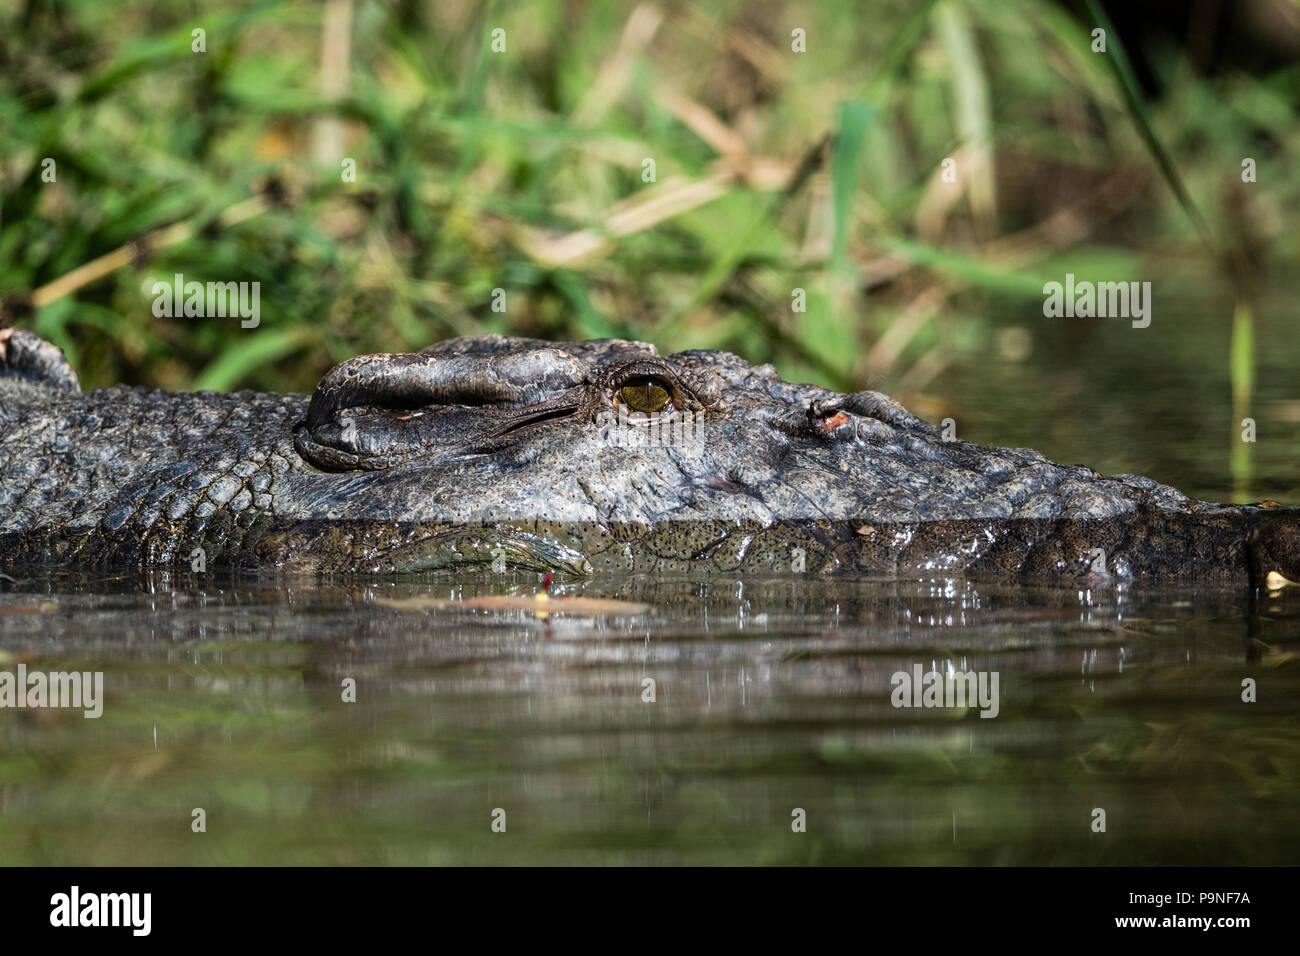 A Saltwater Crocodile swimming on the surface of a river. Stock Photo